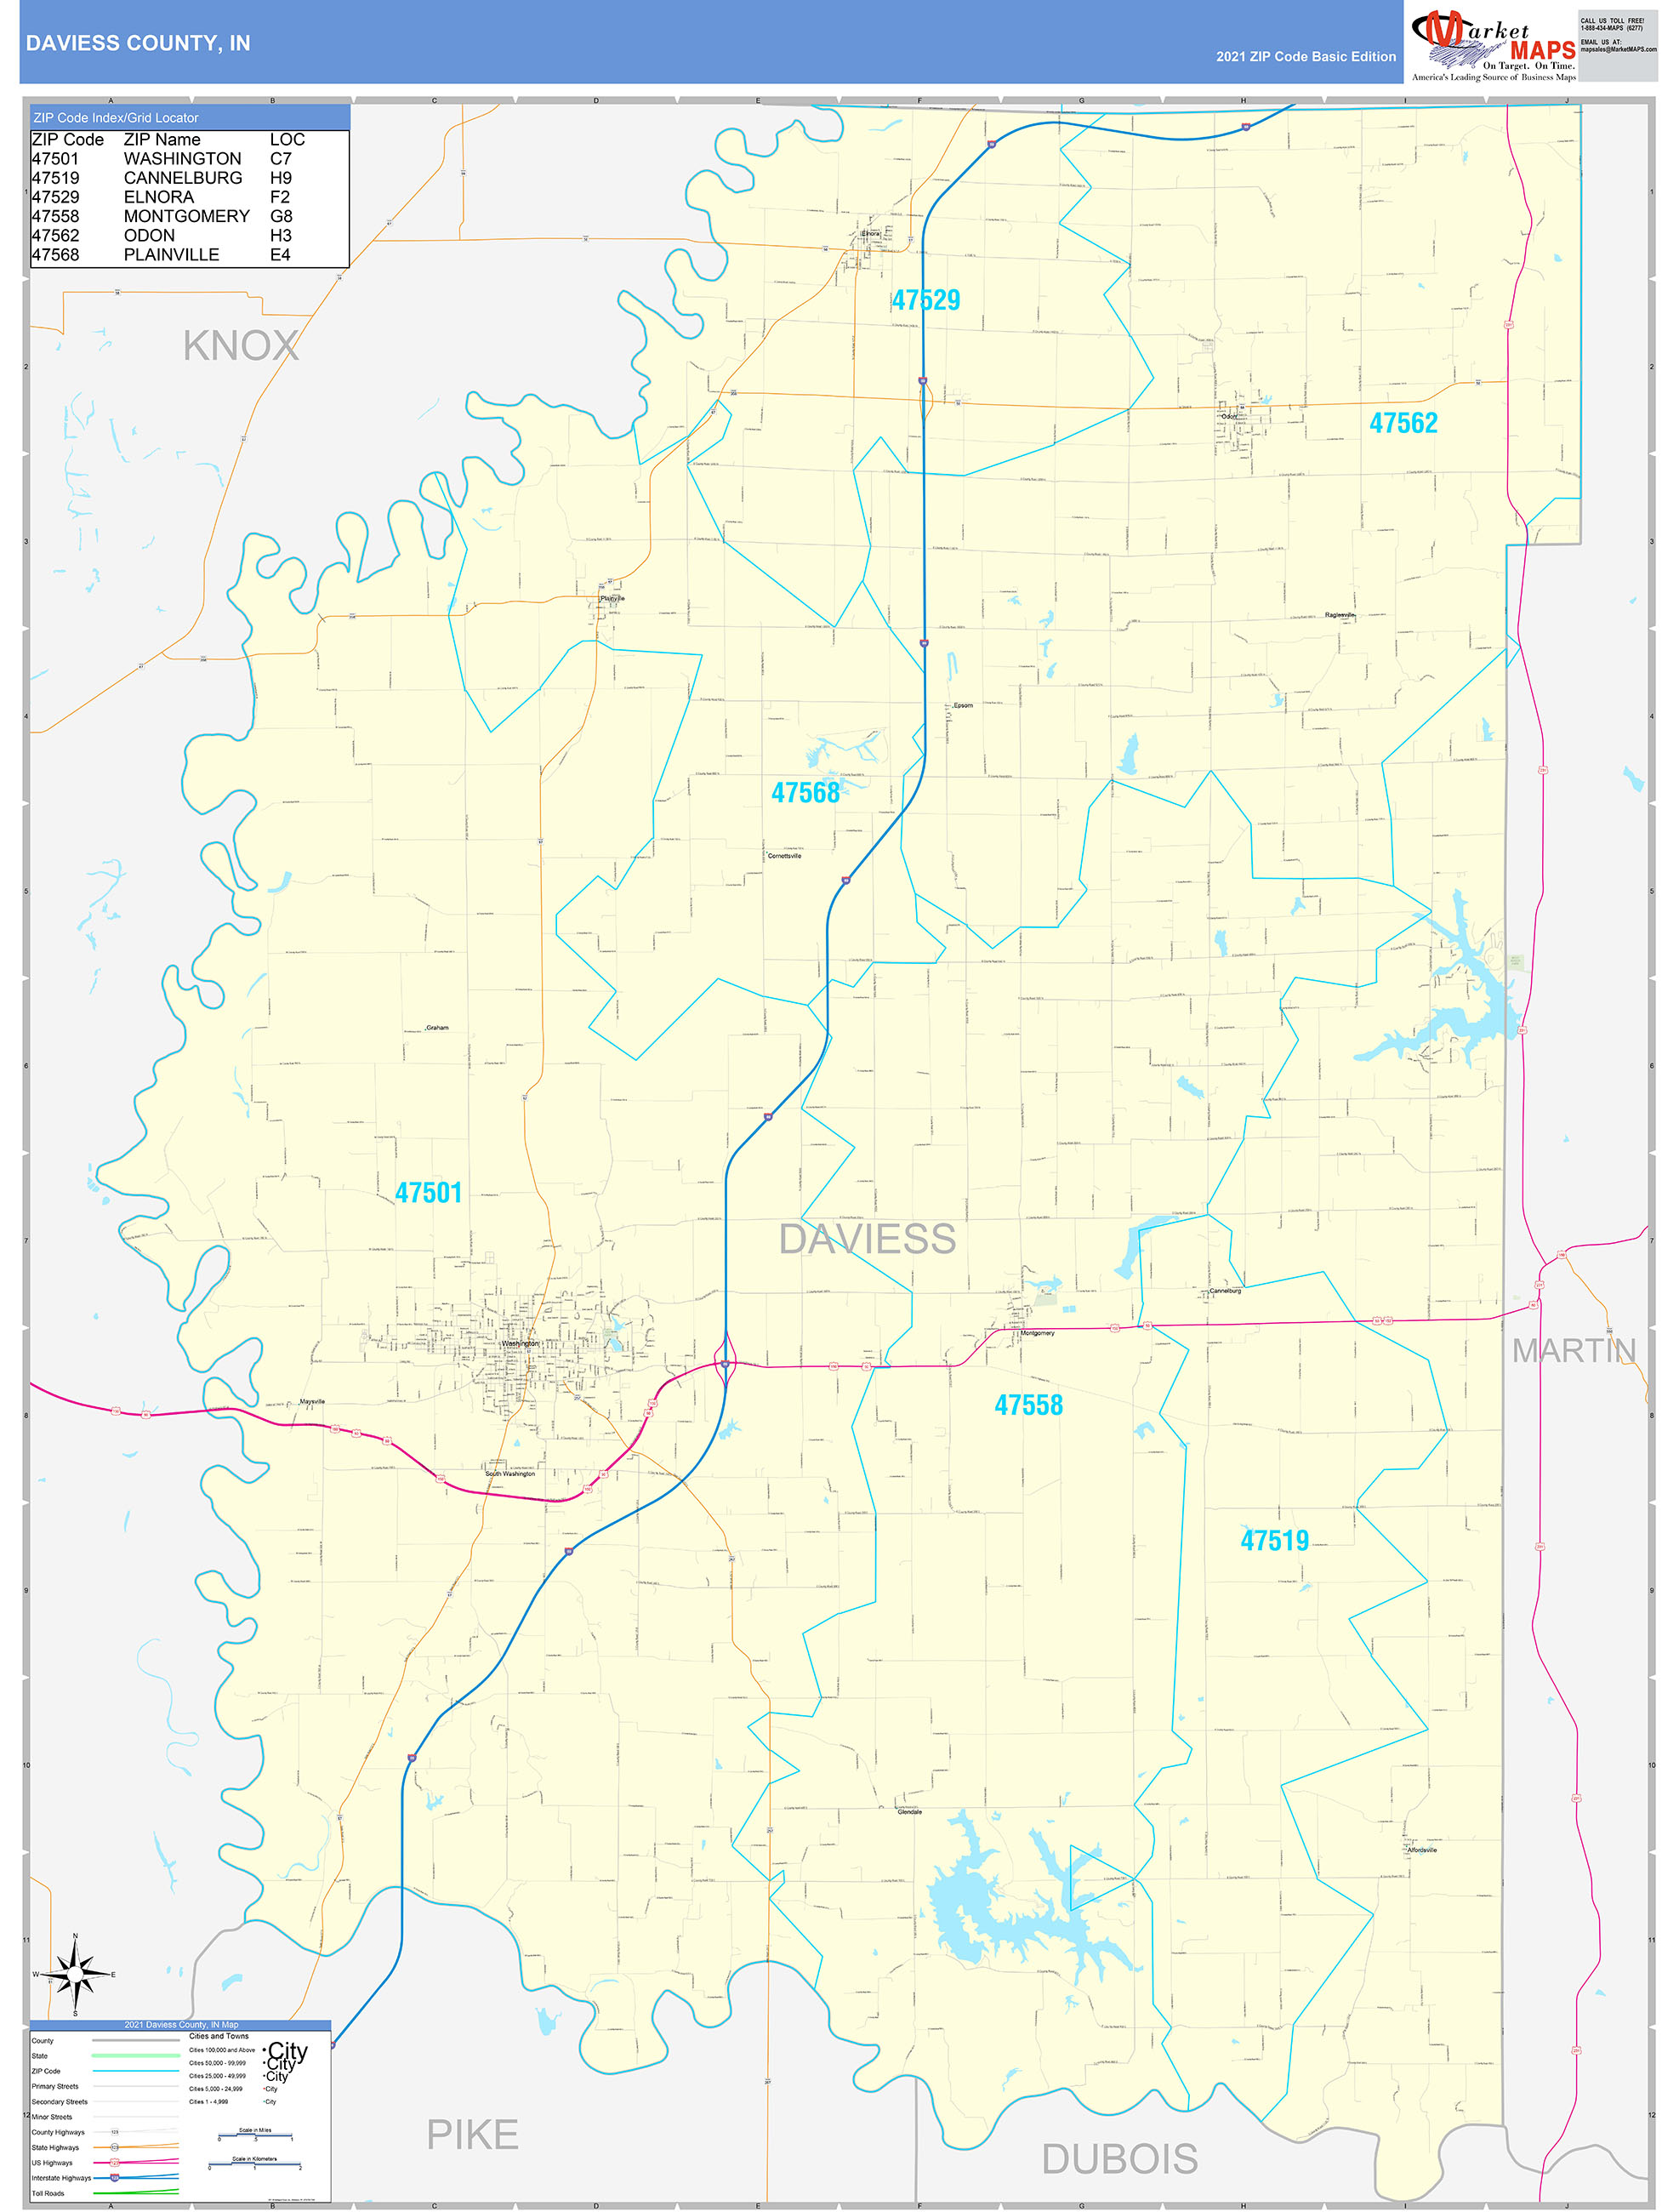 Daviess County, IN Zip Code Wall Map Basic Style by MarketMAPS